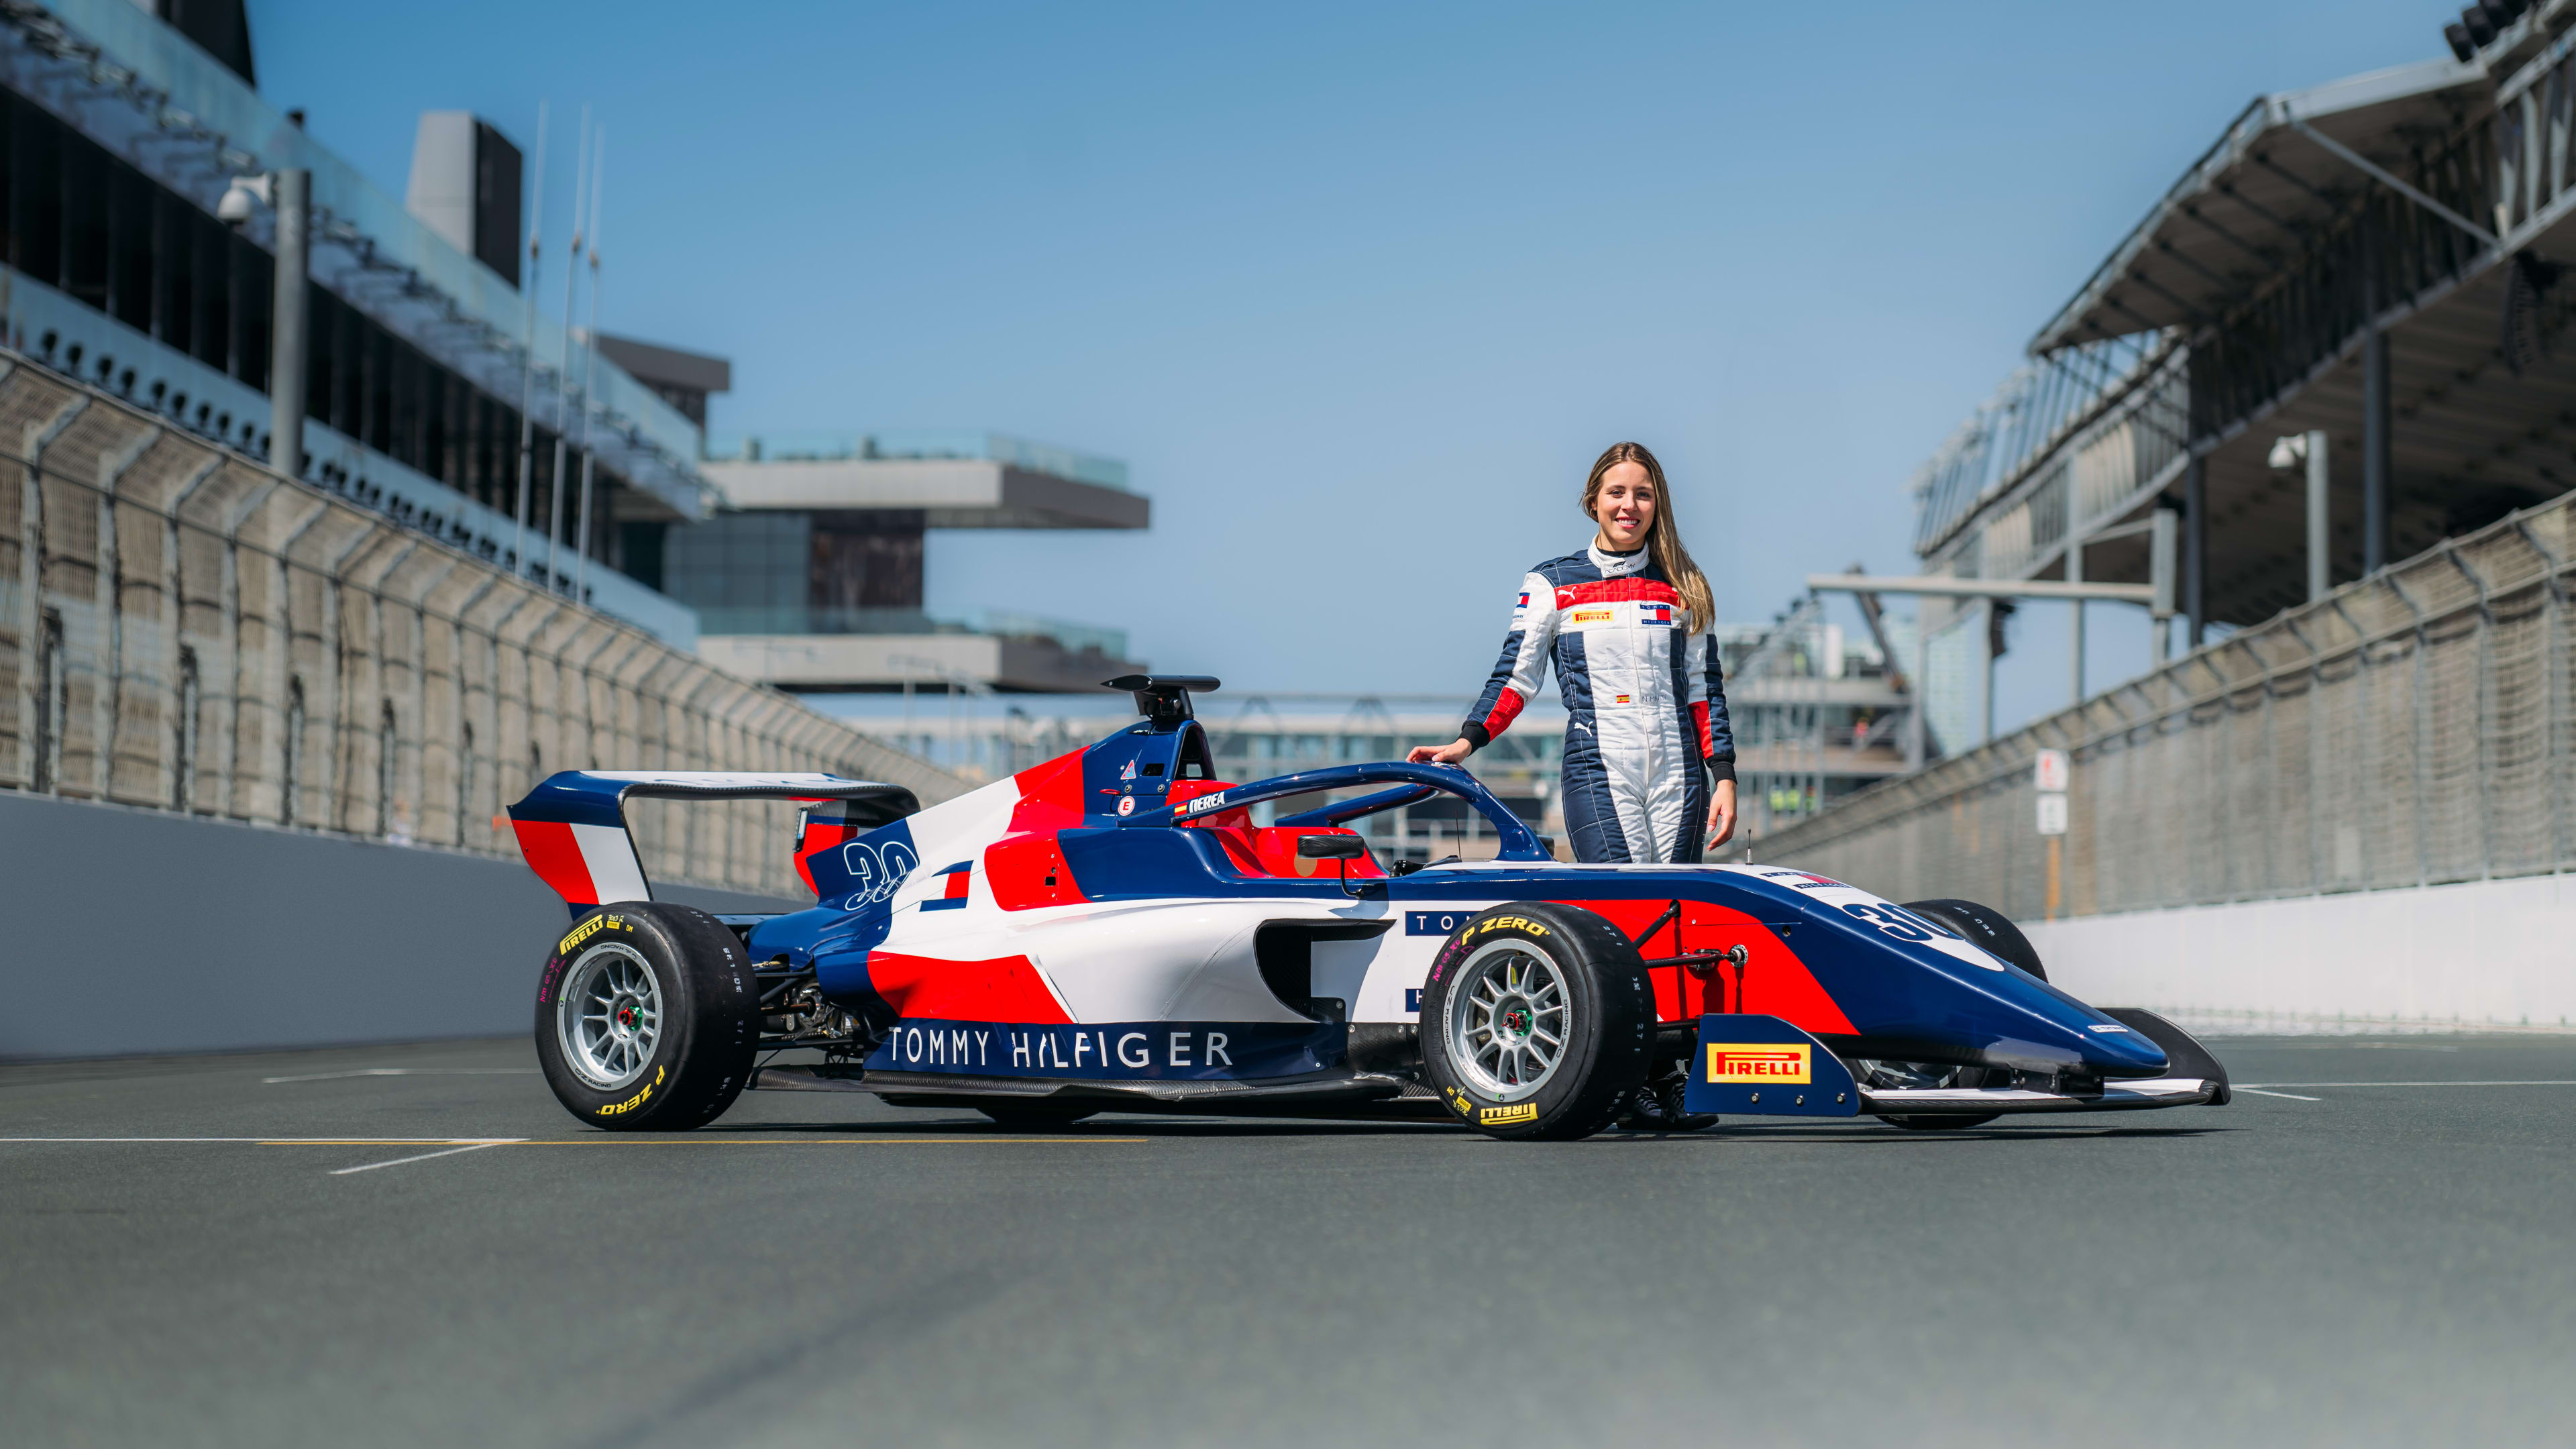 F1 ACADEMY announces Tommy Hilfiger as Official Partner